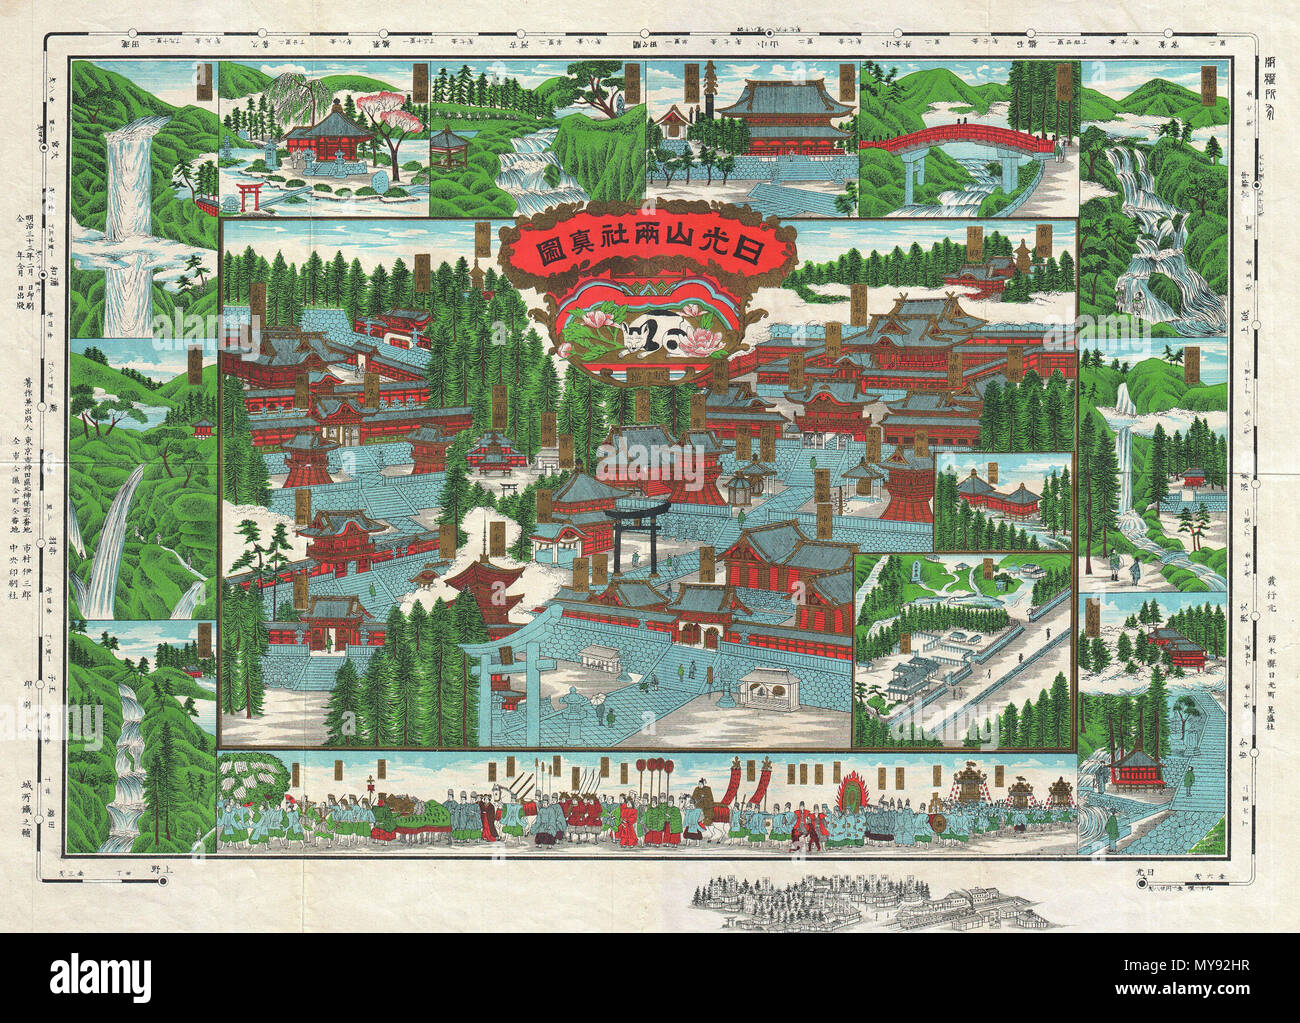 . Nikko .  English: This is an extremely attractive c. 1901 Japanese view of Nikko, Japan. Covers the city center and surrounded by images of Nikko’s most beautiful destinations. Smaller black and white view of the entire city, including the train station, below actual map. Train schedule around the outside doubles as a decorative border. Title cartouche features a black and white cat amidst cherry blossoms. Nikko is a U.N. World Heritage Site and considered to be one of the most beautiful cities in Japan. . 1901 (undated) 10 1901 Japanese View and Map of Nikko, Japan - Geographicus - Nikko-ja Stock Photo